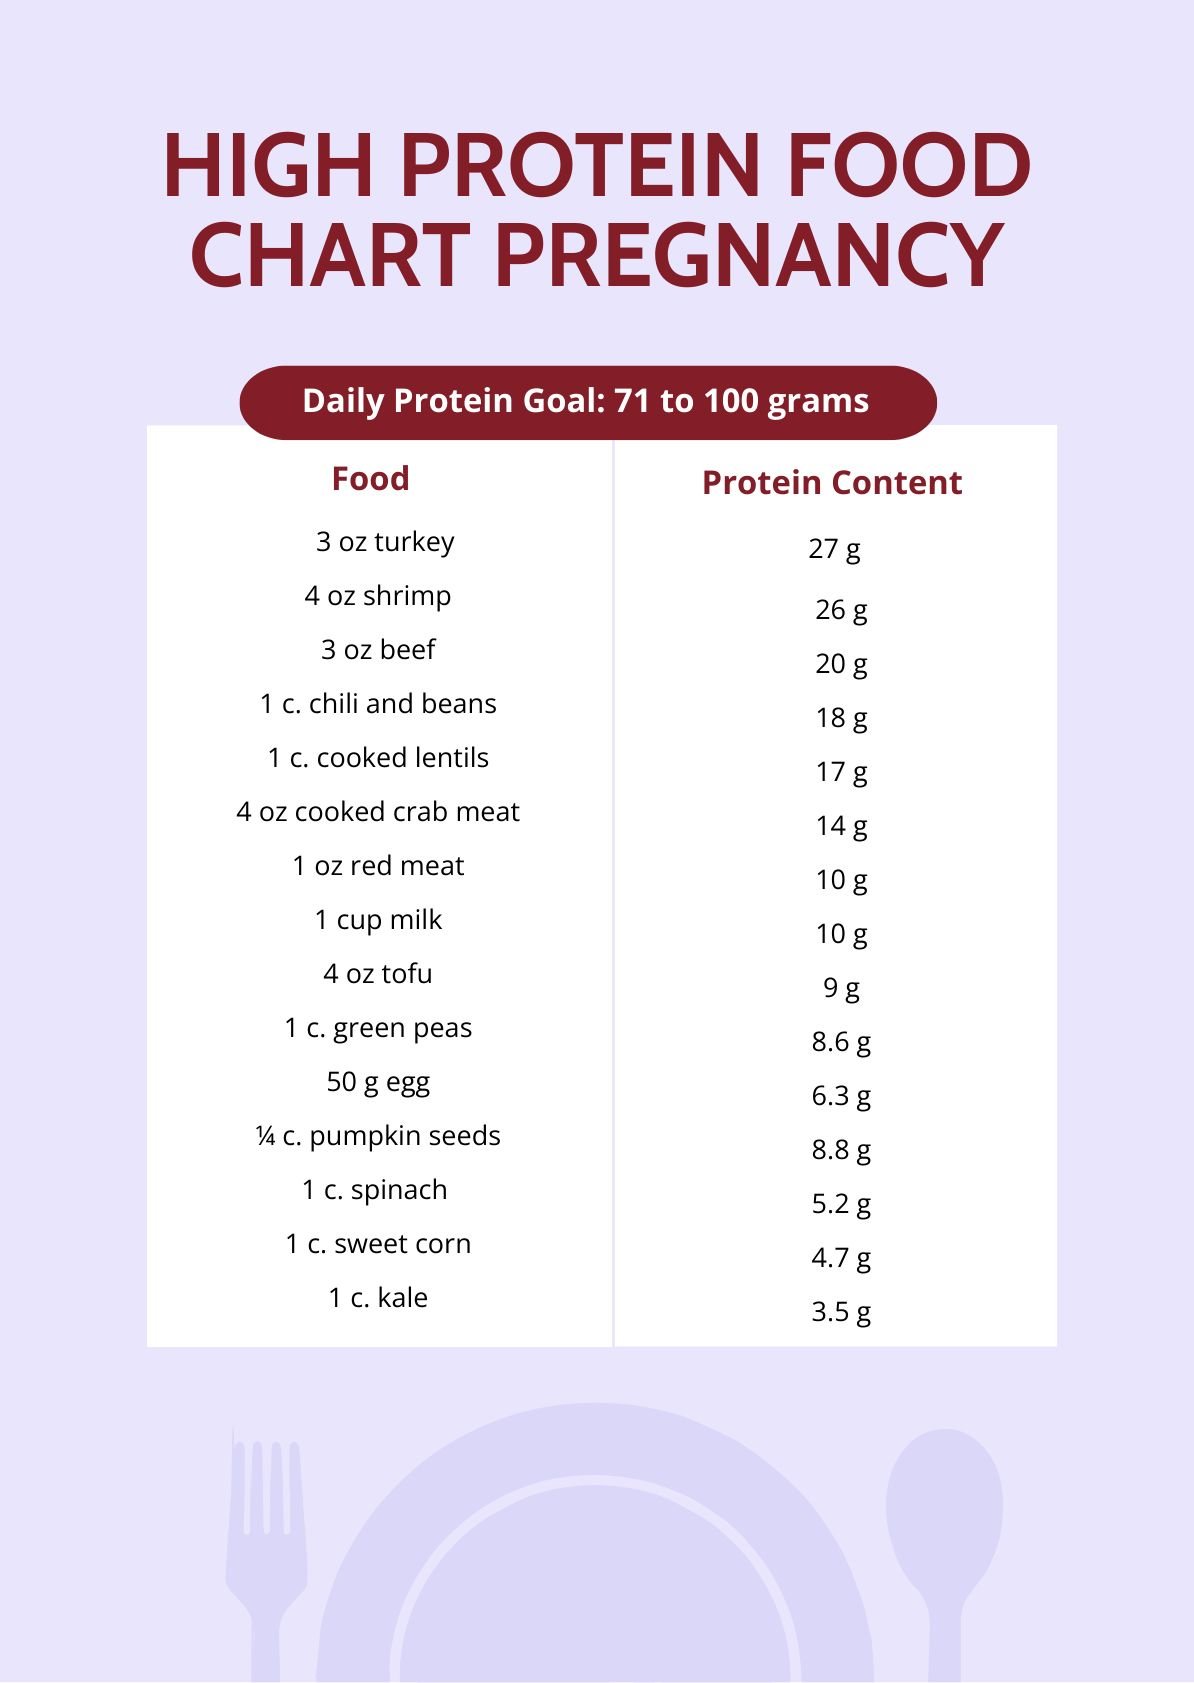 Free High Protein Food Chart Pregnancy - Pdf | Template.Net